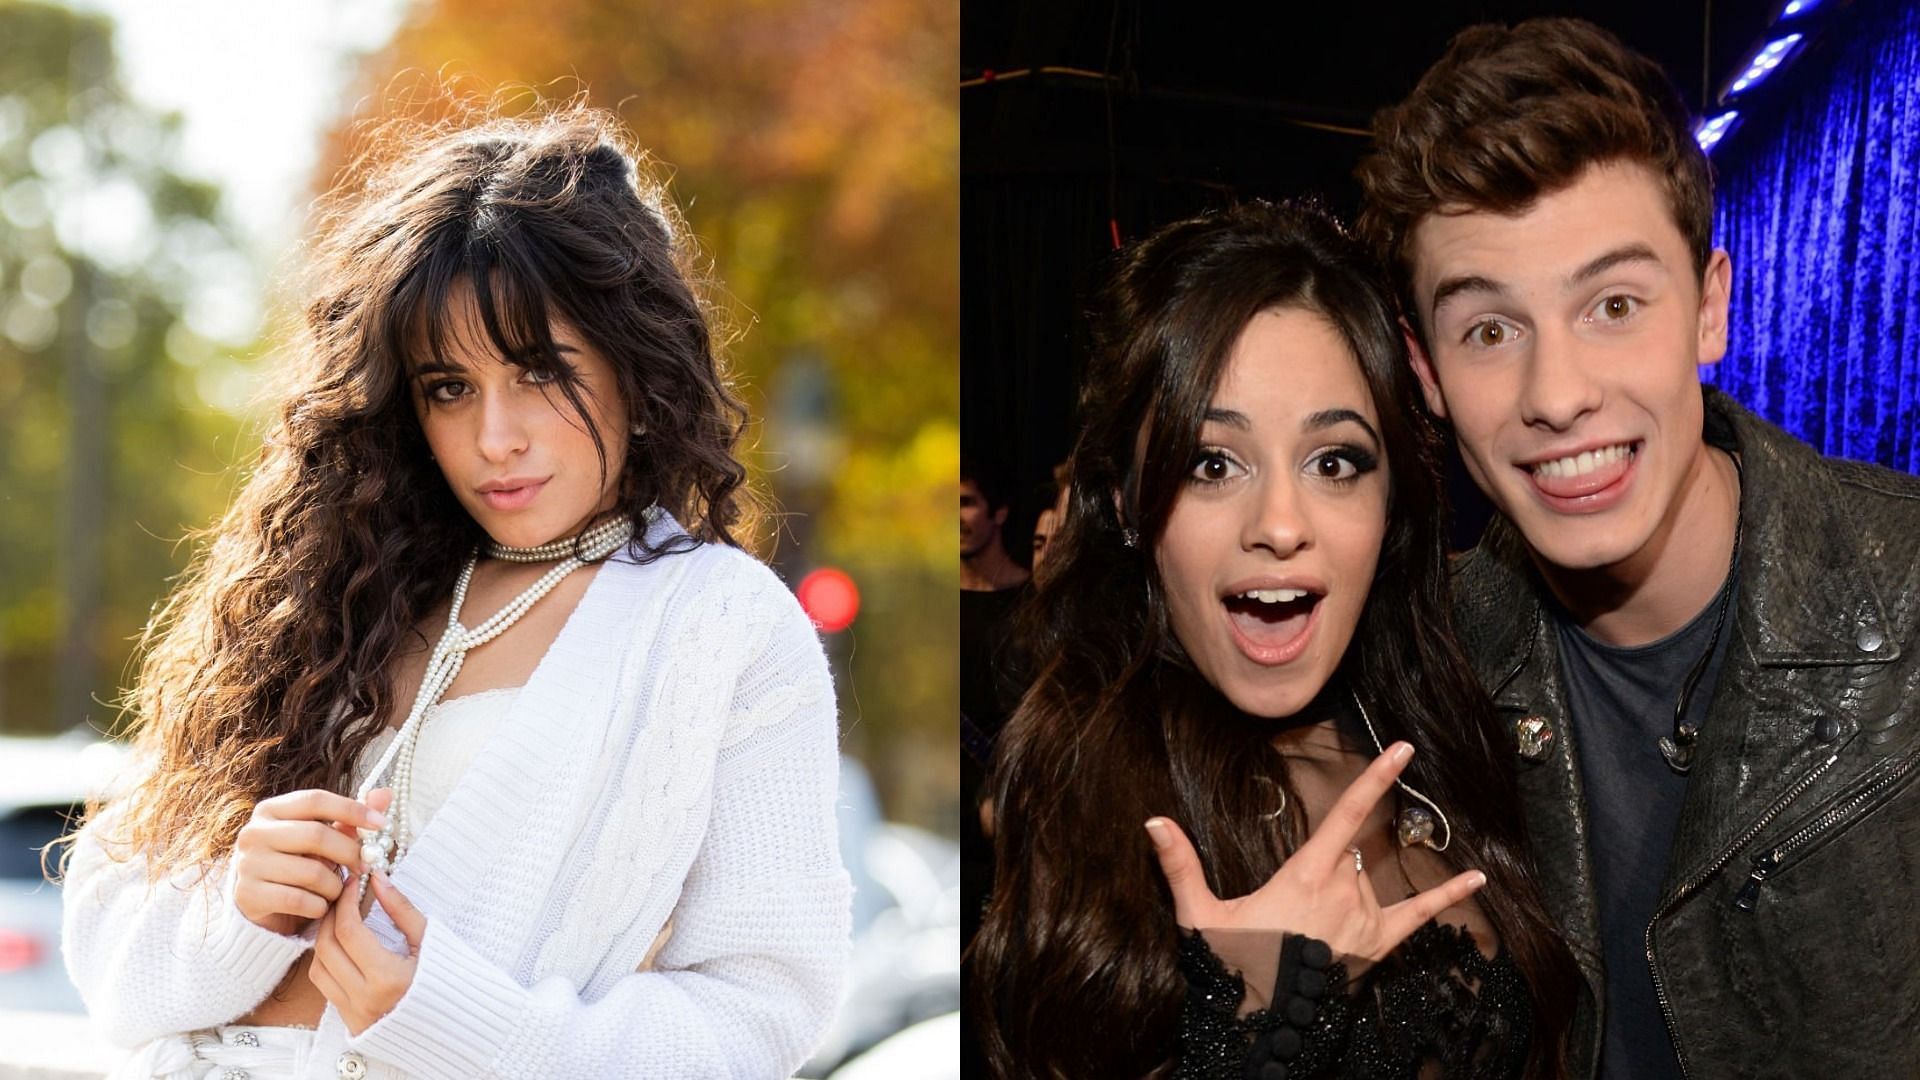 Camila Cabello reflected on her split with Shawn Mendes nearly five months after their break-up (Image via Christian Vierig/Getty Images and Kevin Mazur/WireImage)